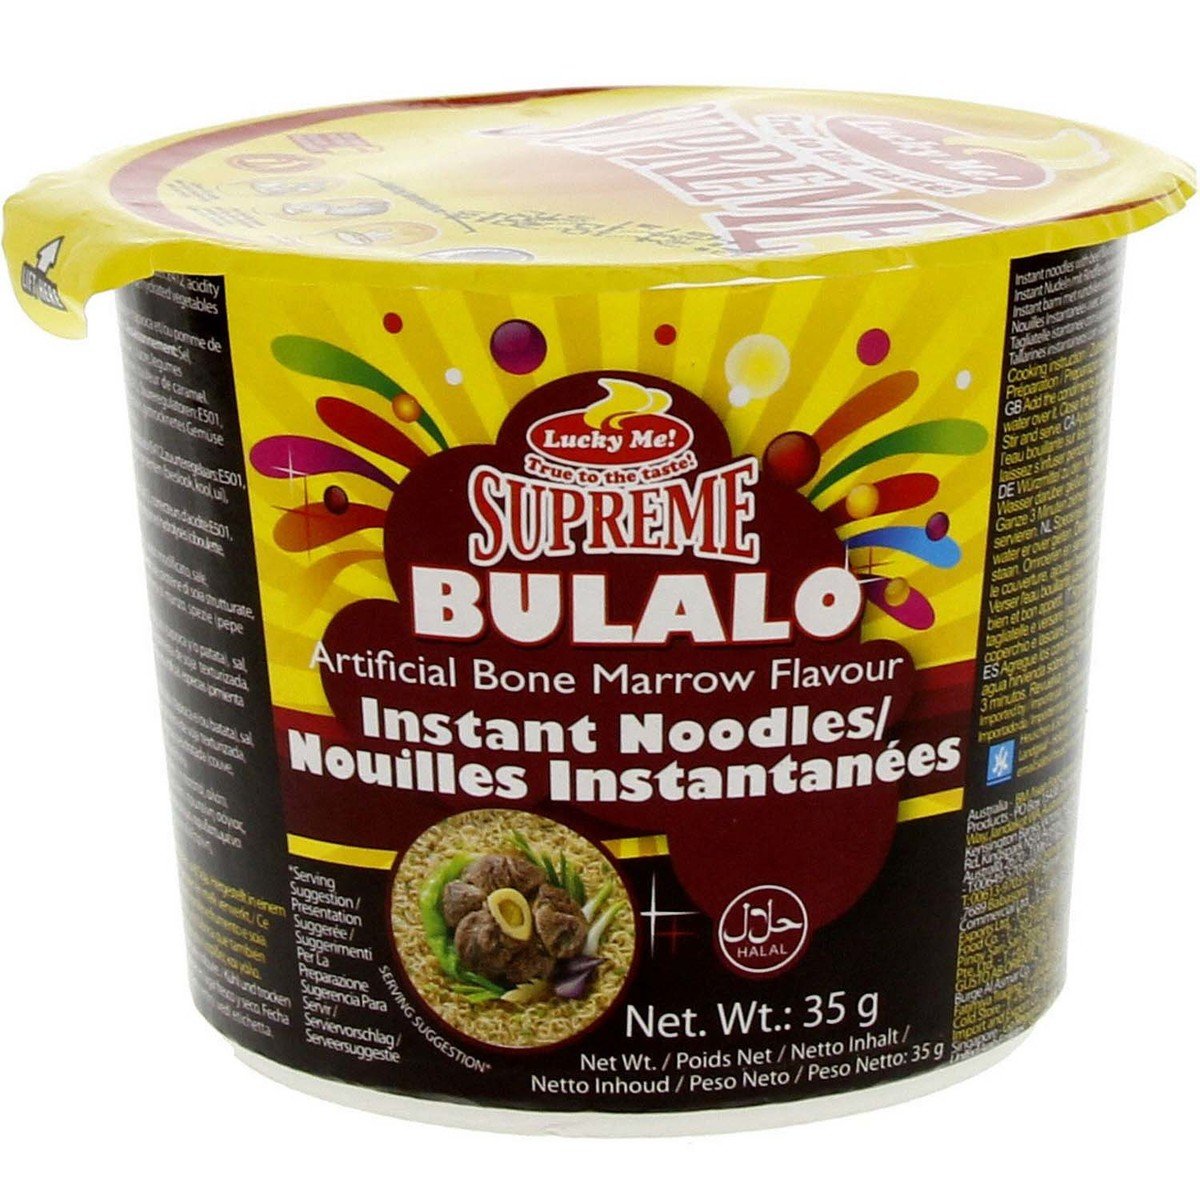 Lucky Me Bulalo Instant Noodles 35 g